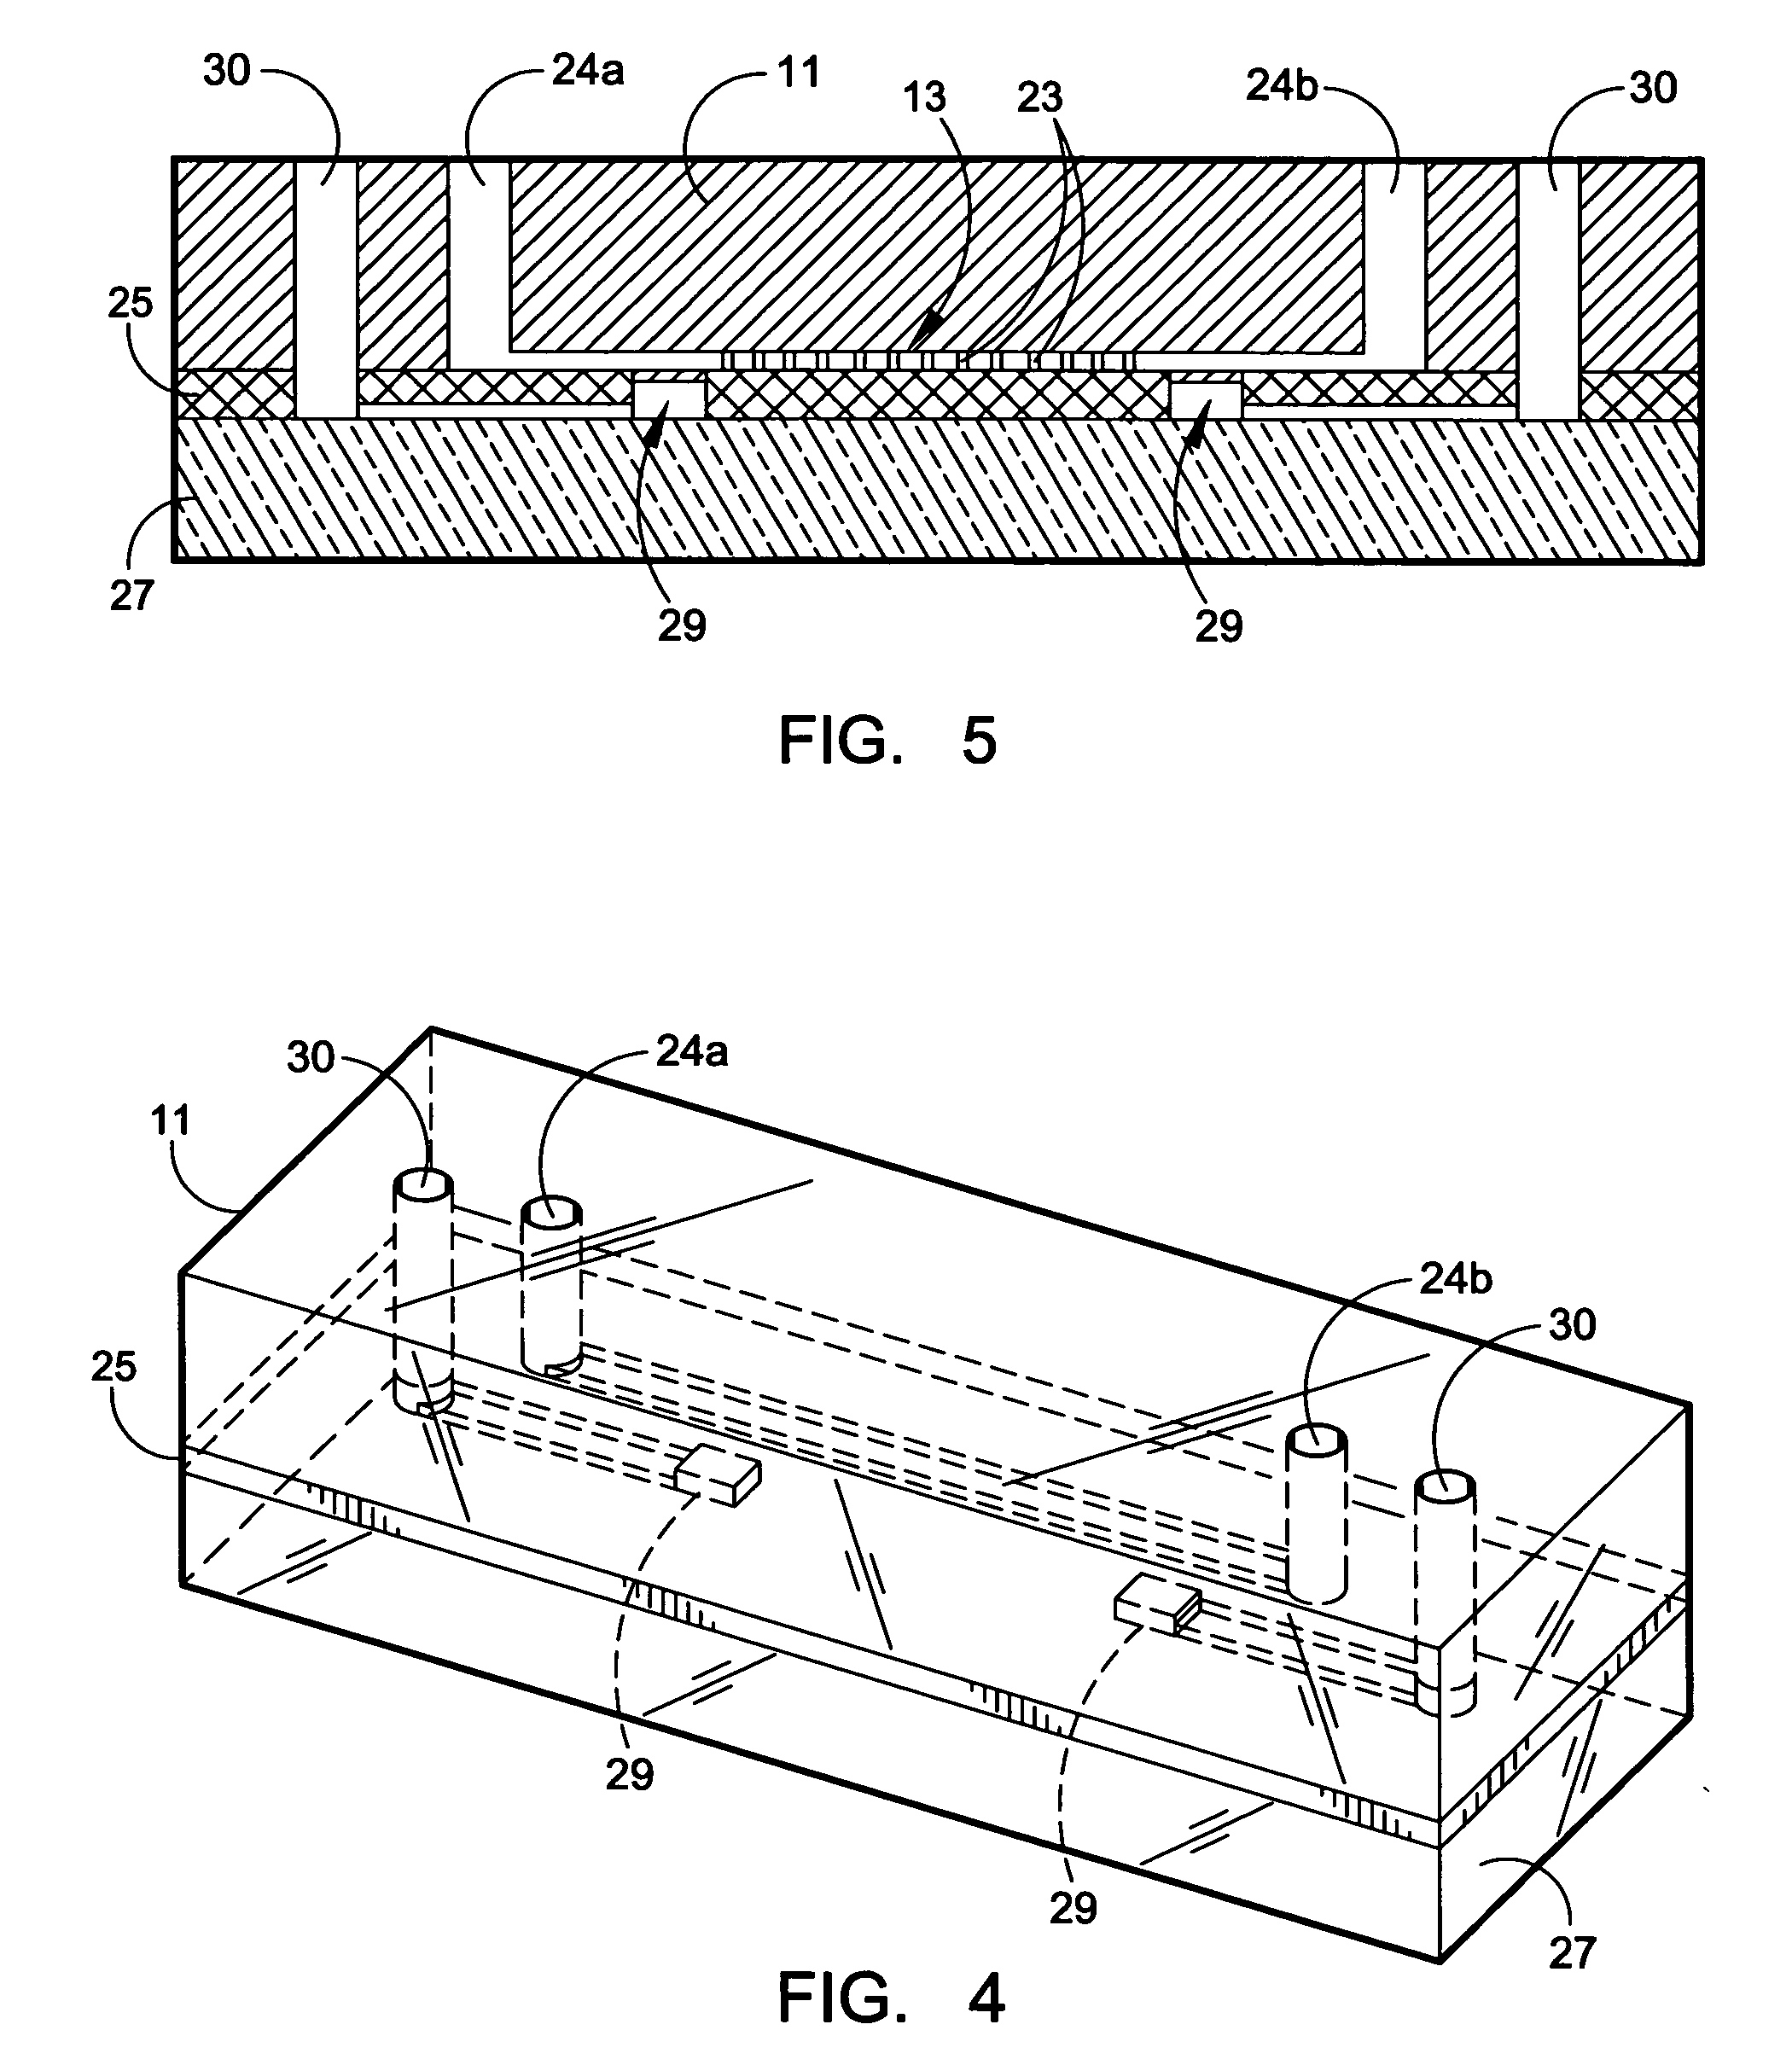 Recovery of rare cells using a microchannel apparatus with patterned posts